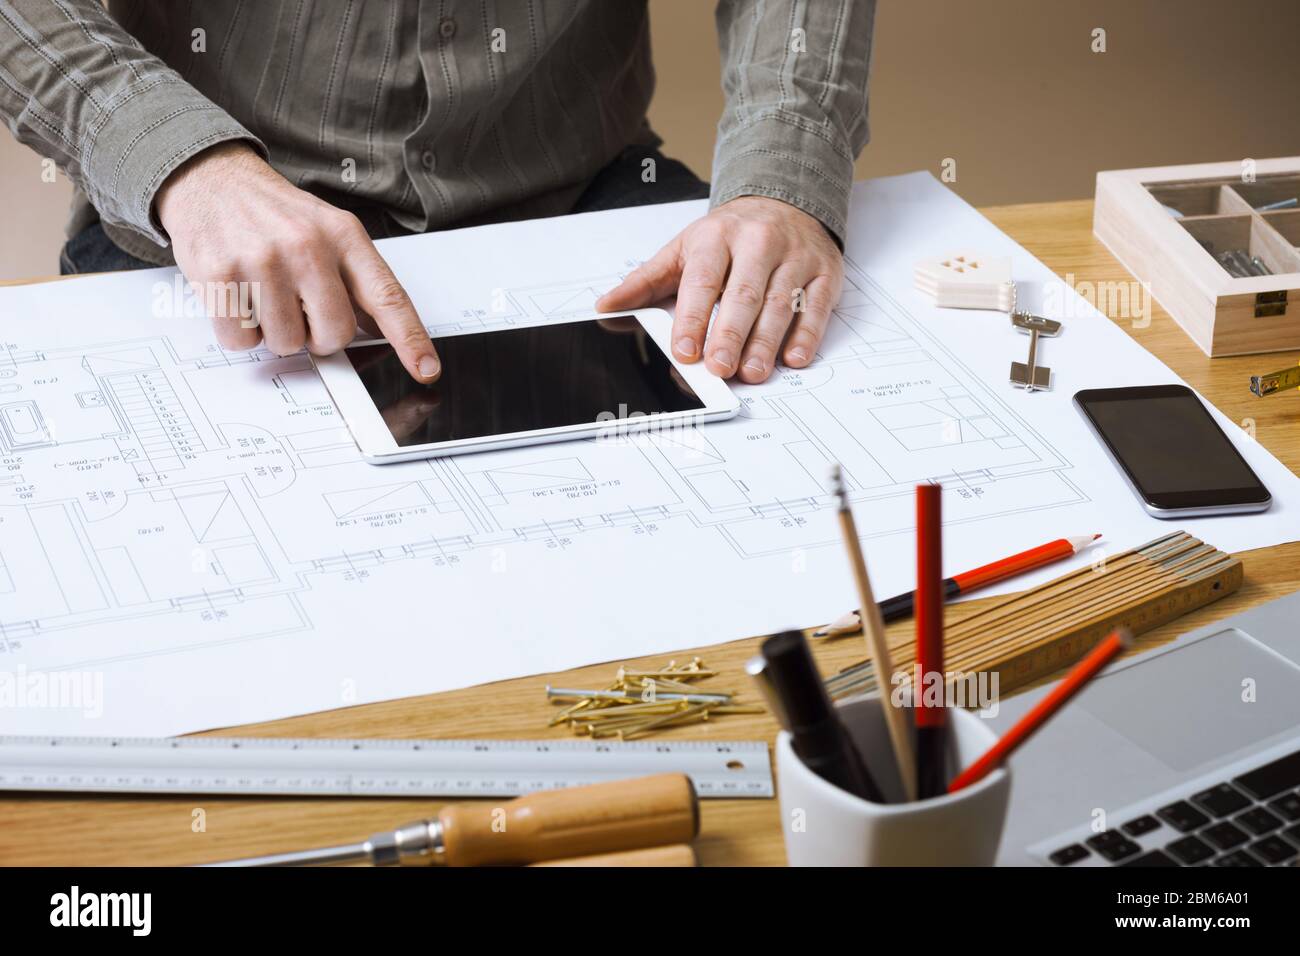 Professional architect and construction engineer working at office desk hands close-up, he is using a touch screen tablet Stock Photo